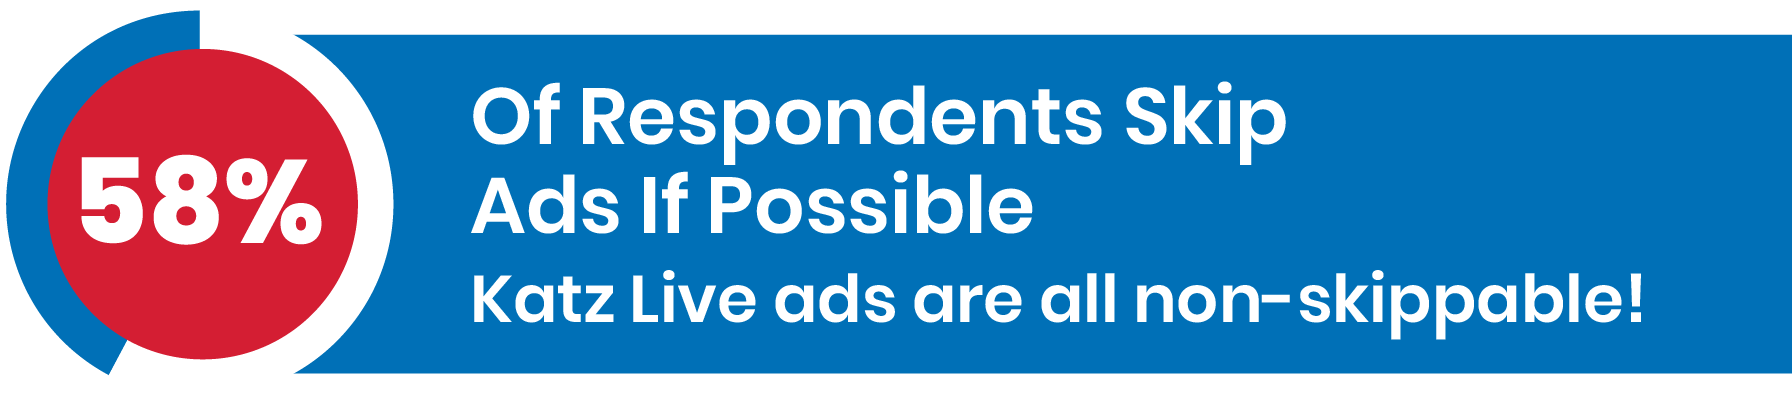 58% Of Respondents Skip Ads If Possible. Katz Live ads are all non-skippable!